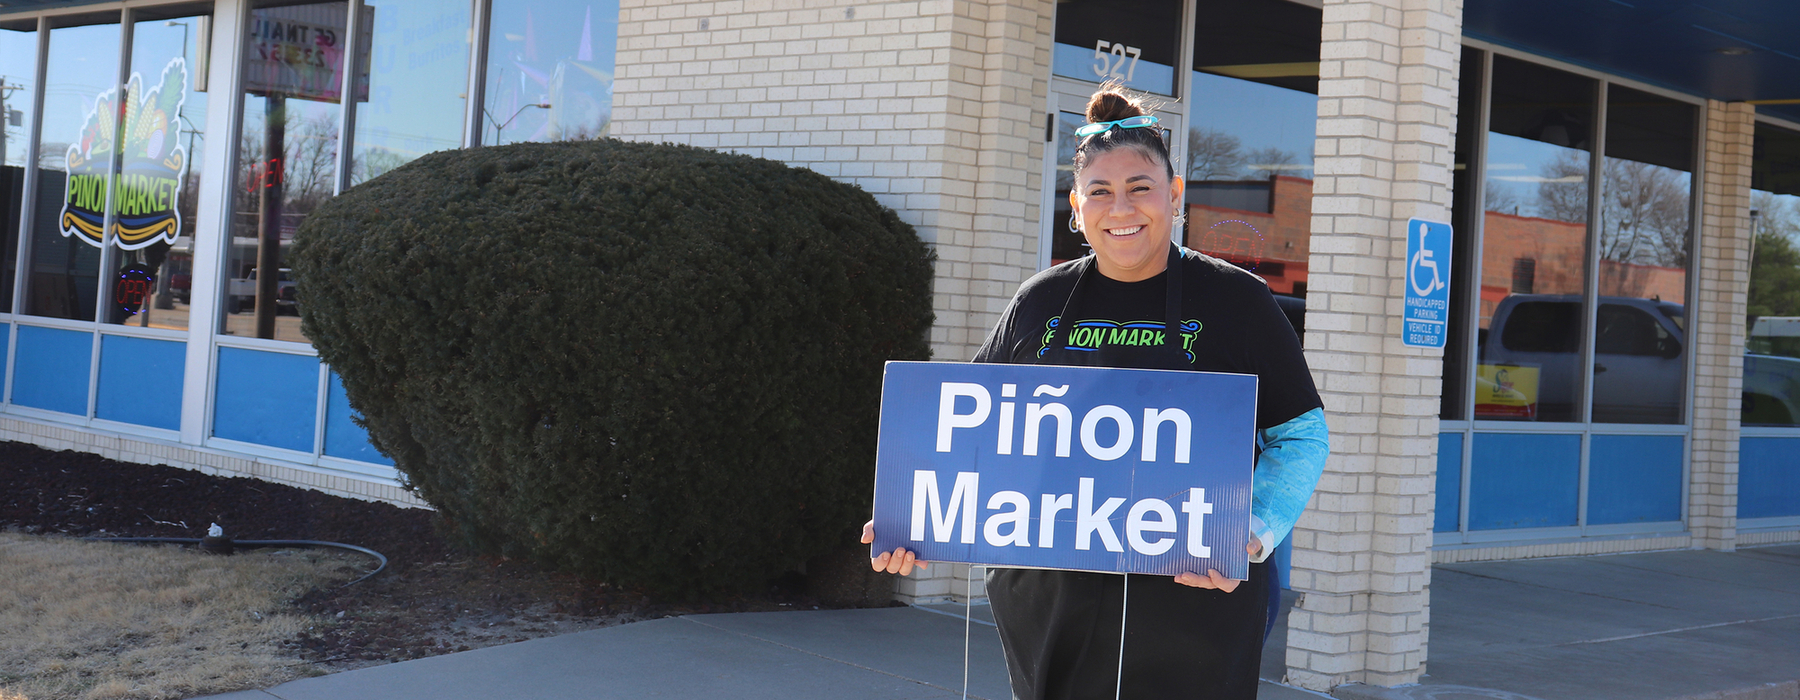 Latino woman stands outside grocery story holding a sign that says "Pinion Market"